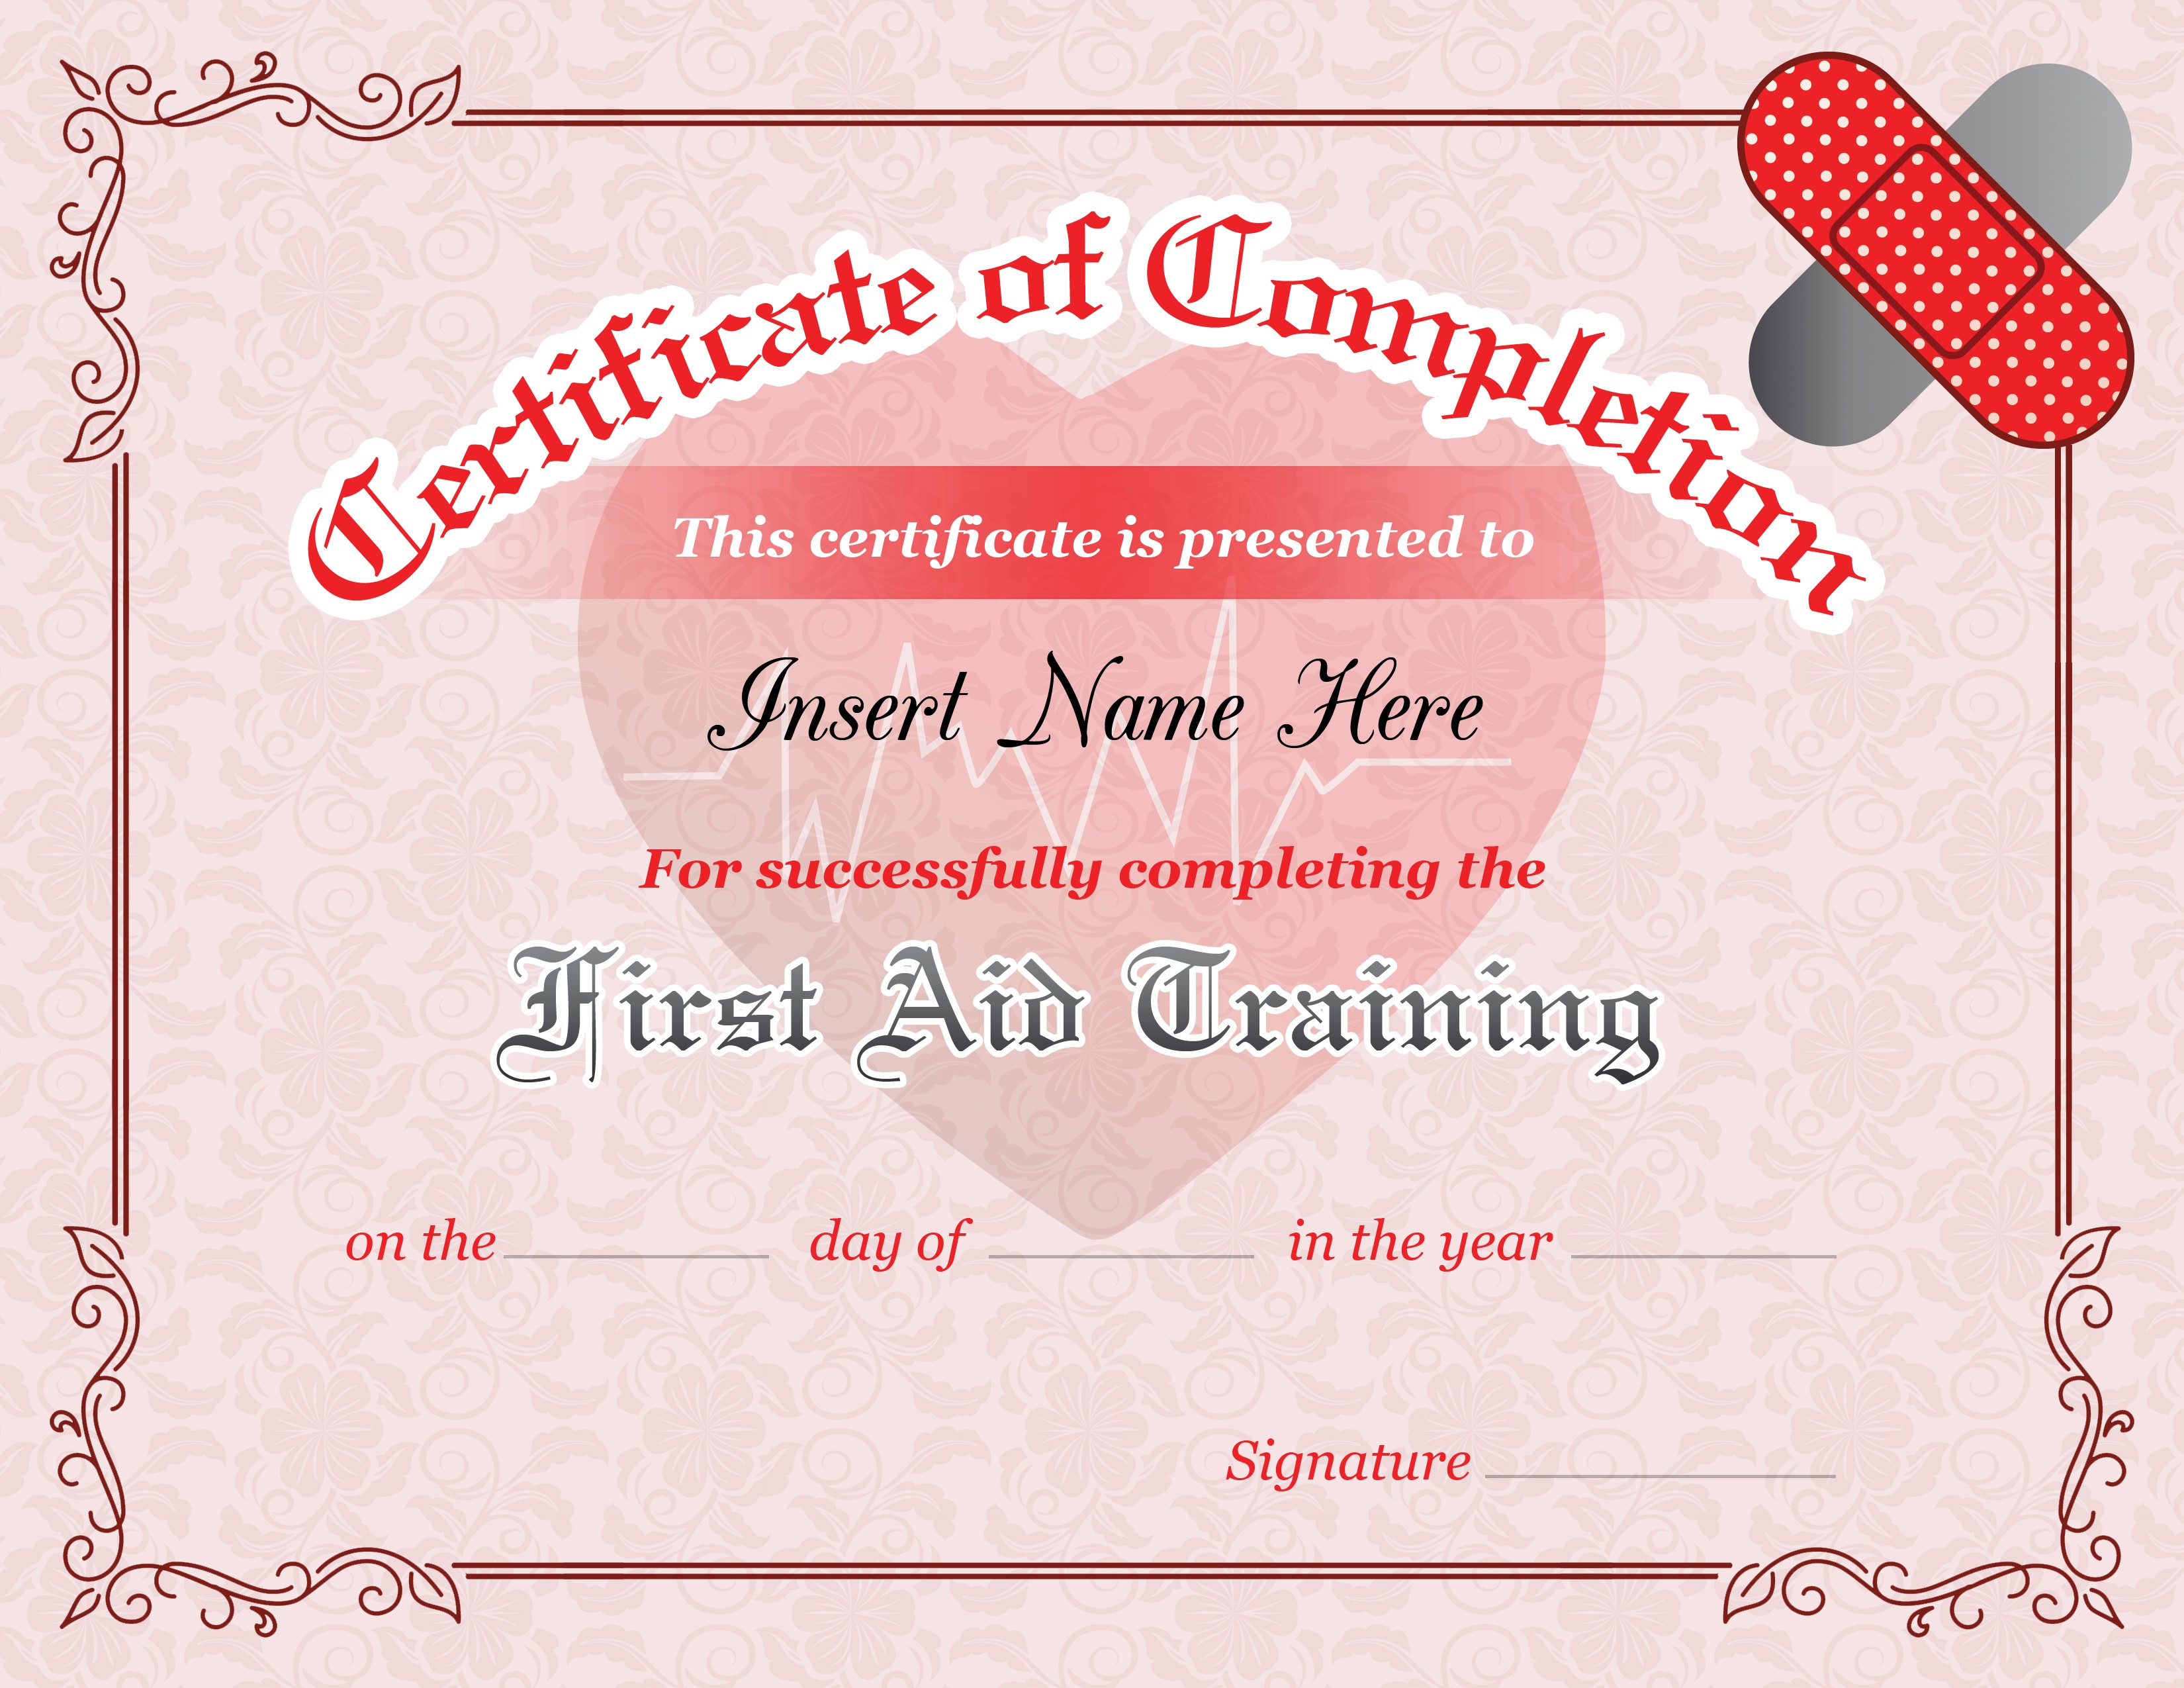 First Aid Training Completion Certificate Template Formal Word